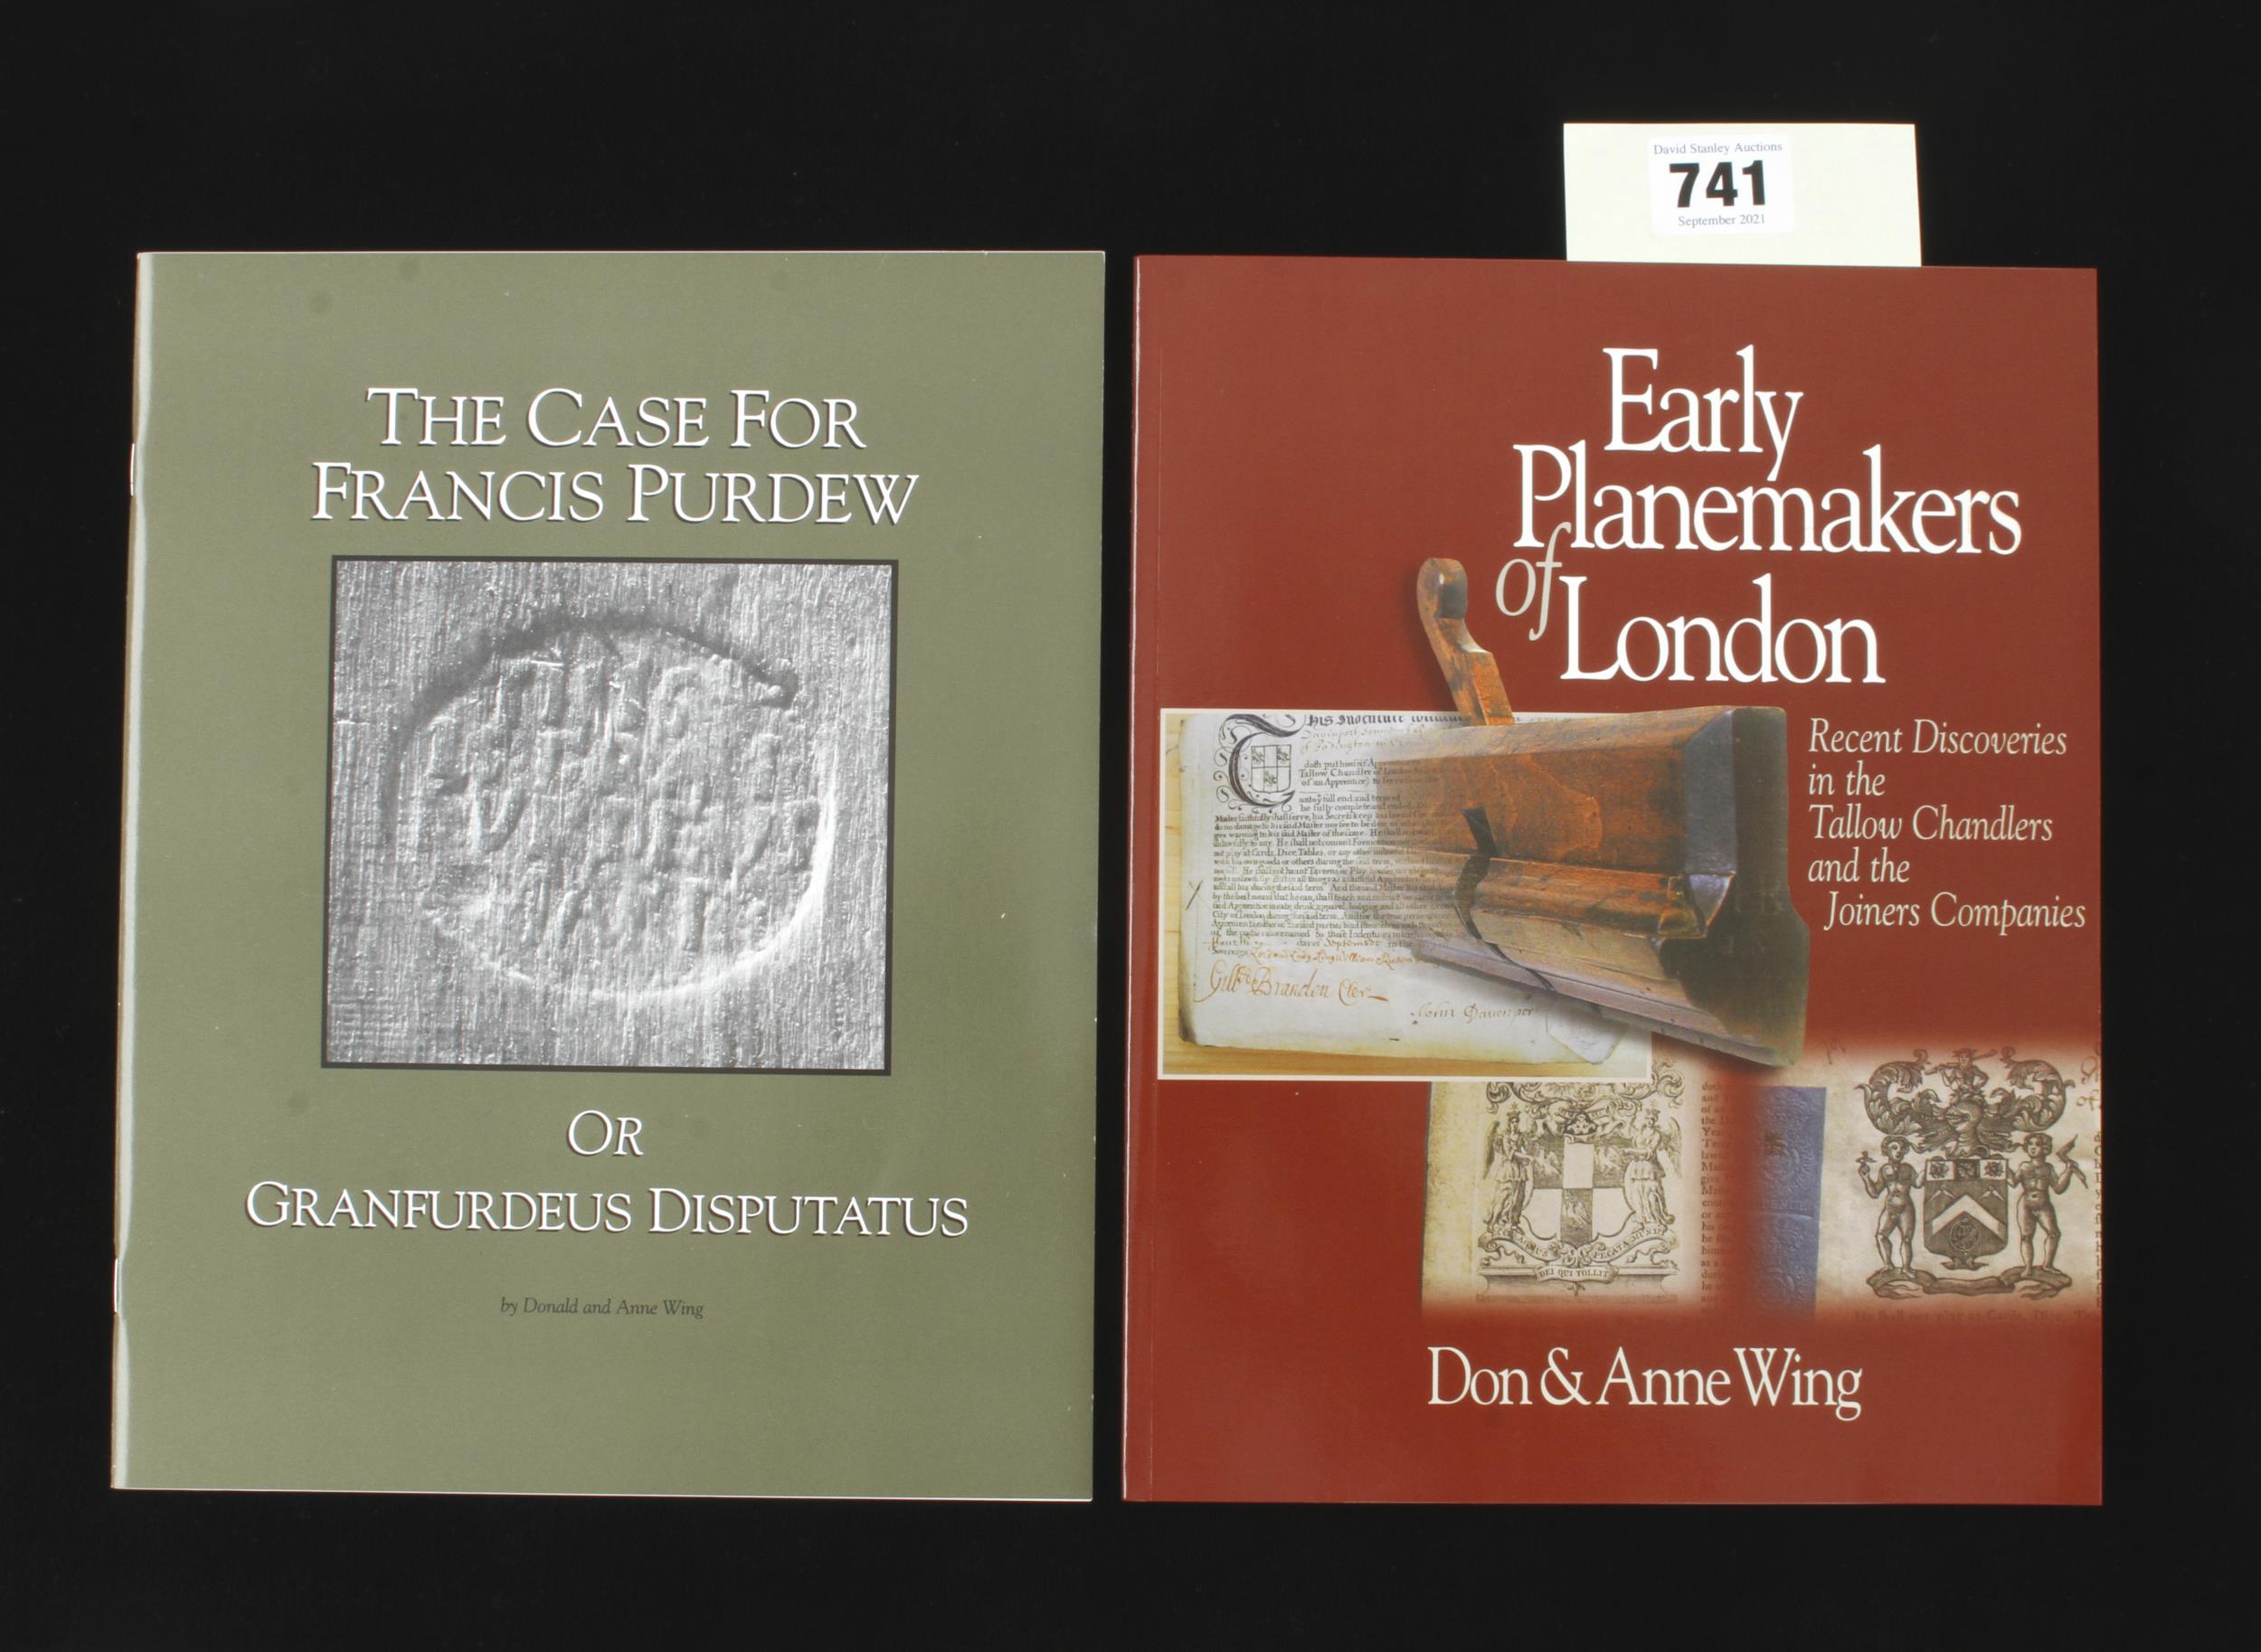 Don & Anne Wing; 2005 Early Planemakers of London and The Case for Francis Purdew both unused F